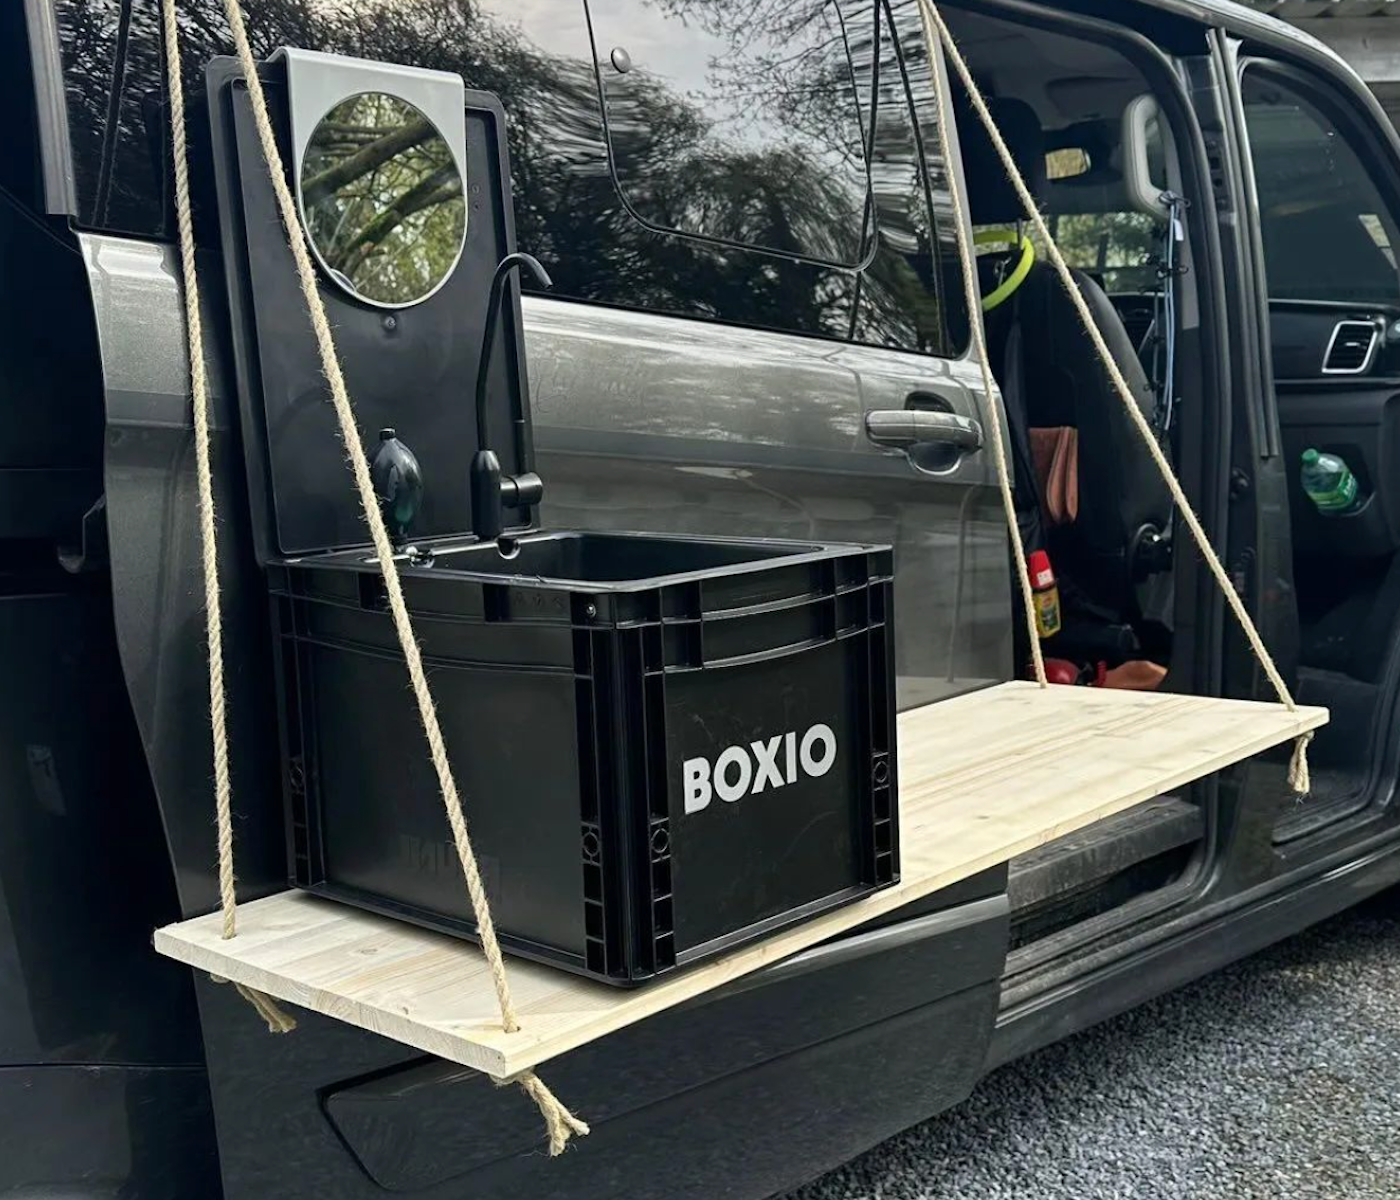 BOXIO - Wash: Portable Sink - Convenient Camping Sink Solution! 15,7 x  11,8 x 11 Compact with Unique Design, Separate Canister, Lightweight  Mobile Sink for Garden/Camping/Outdoor Events/Gatherings/Worksite/RV/Indoor